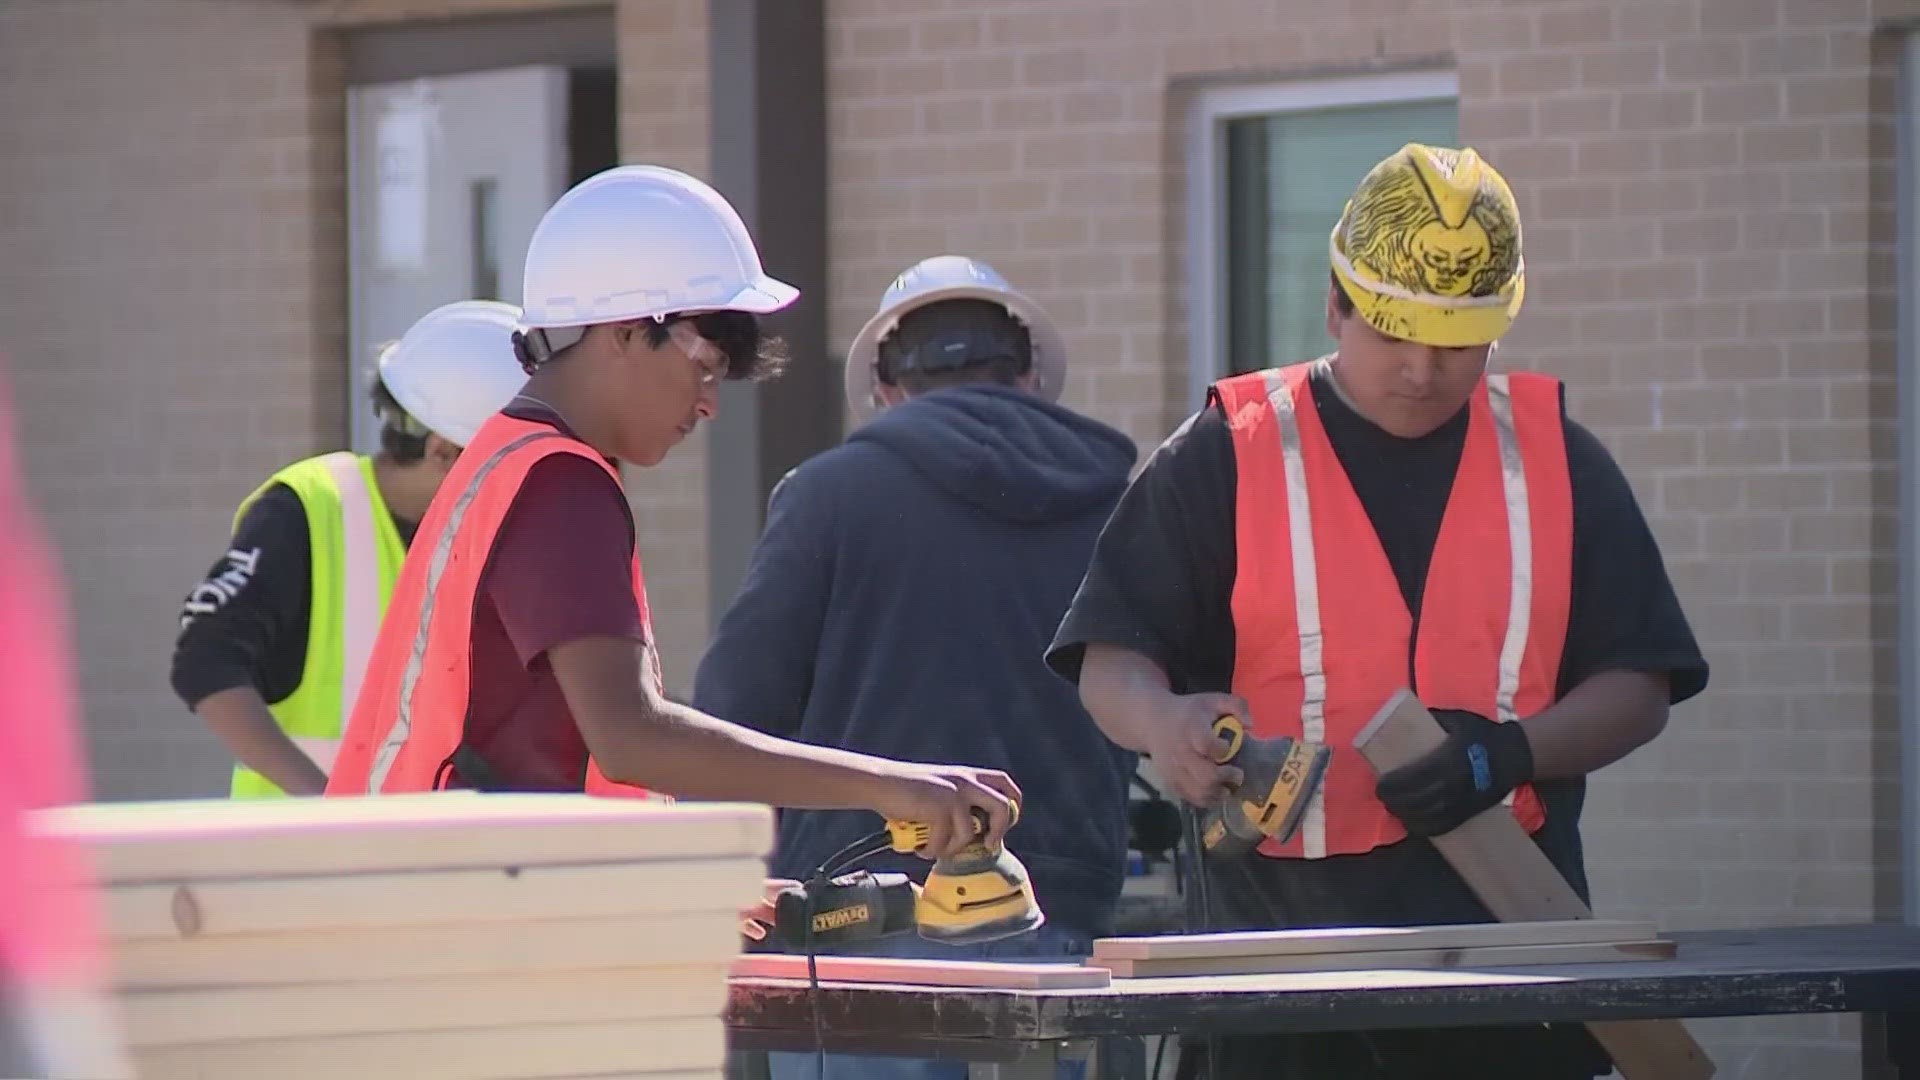 Students are getting hands on experience in the building trades with a new pre-apprenticeship program.